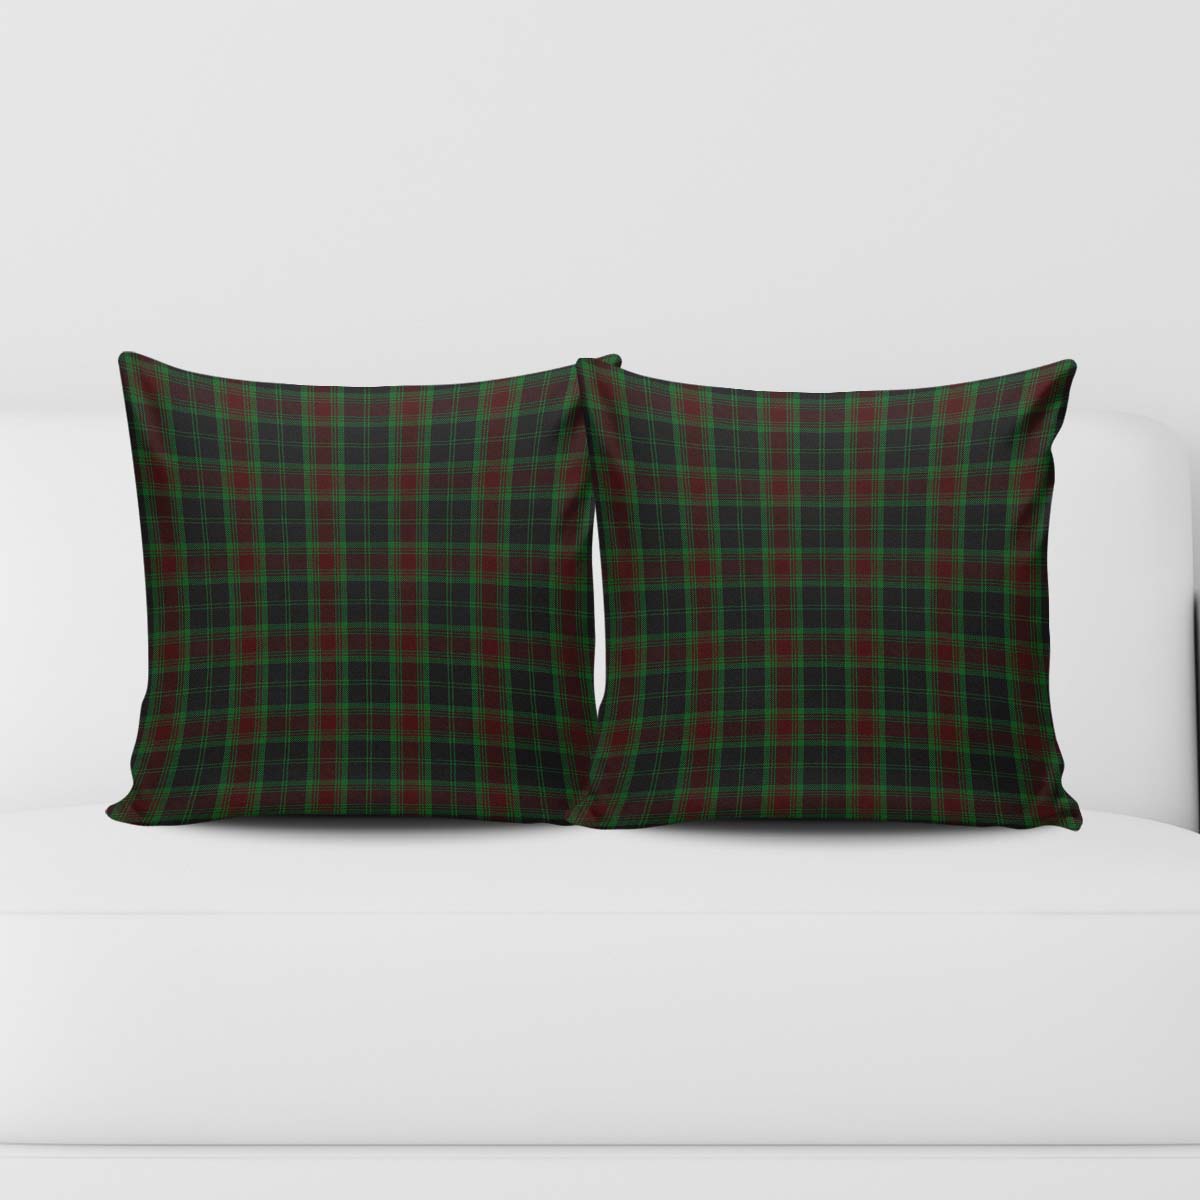 Carlow County Ireland Tartan Pillow Cover Square Pillow Cover - Tartanvibesclothing